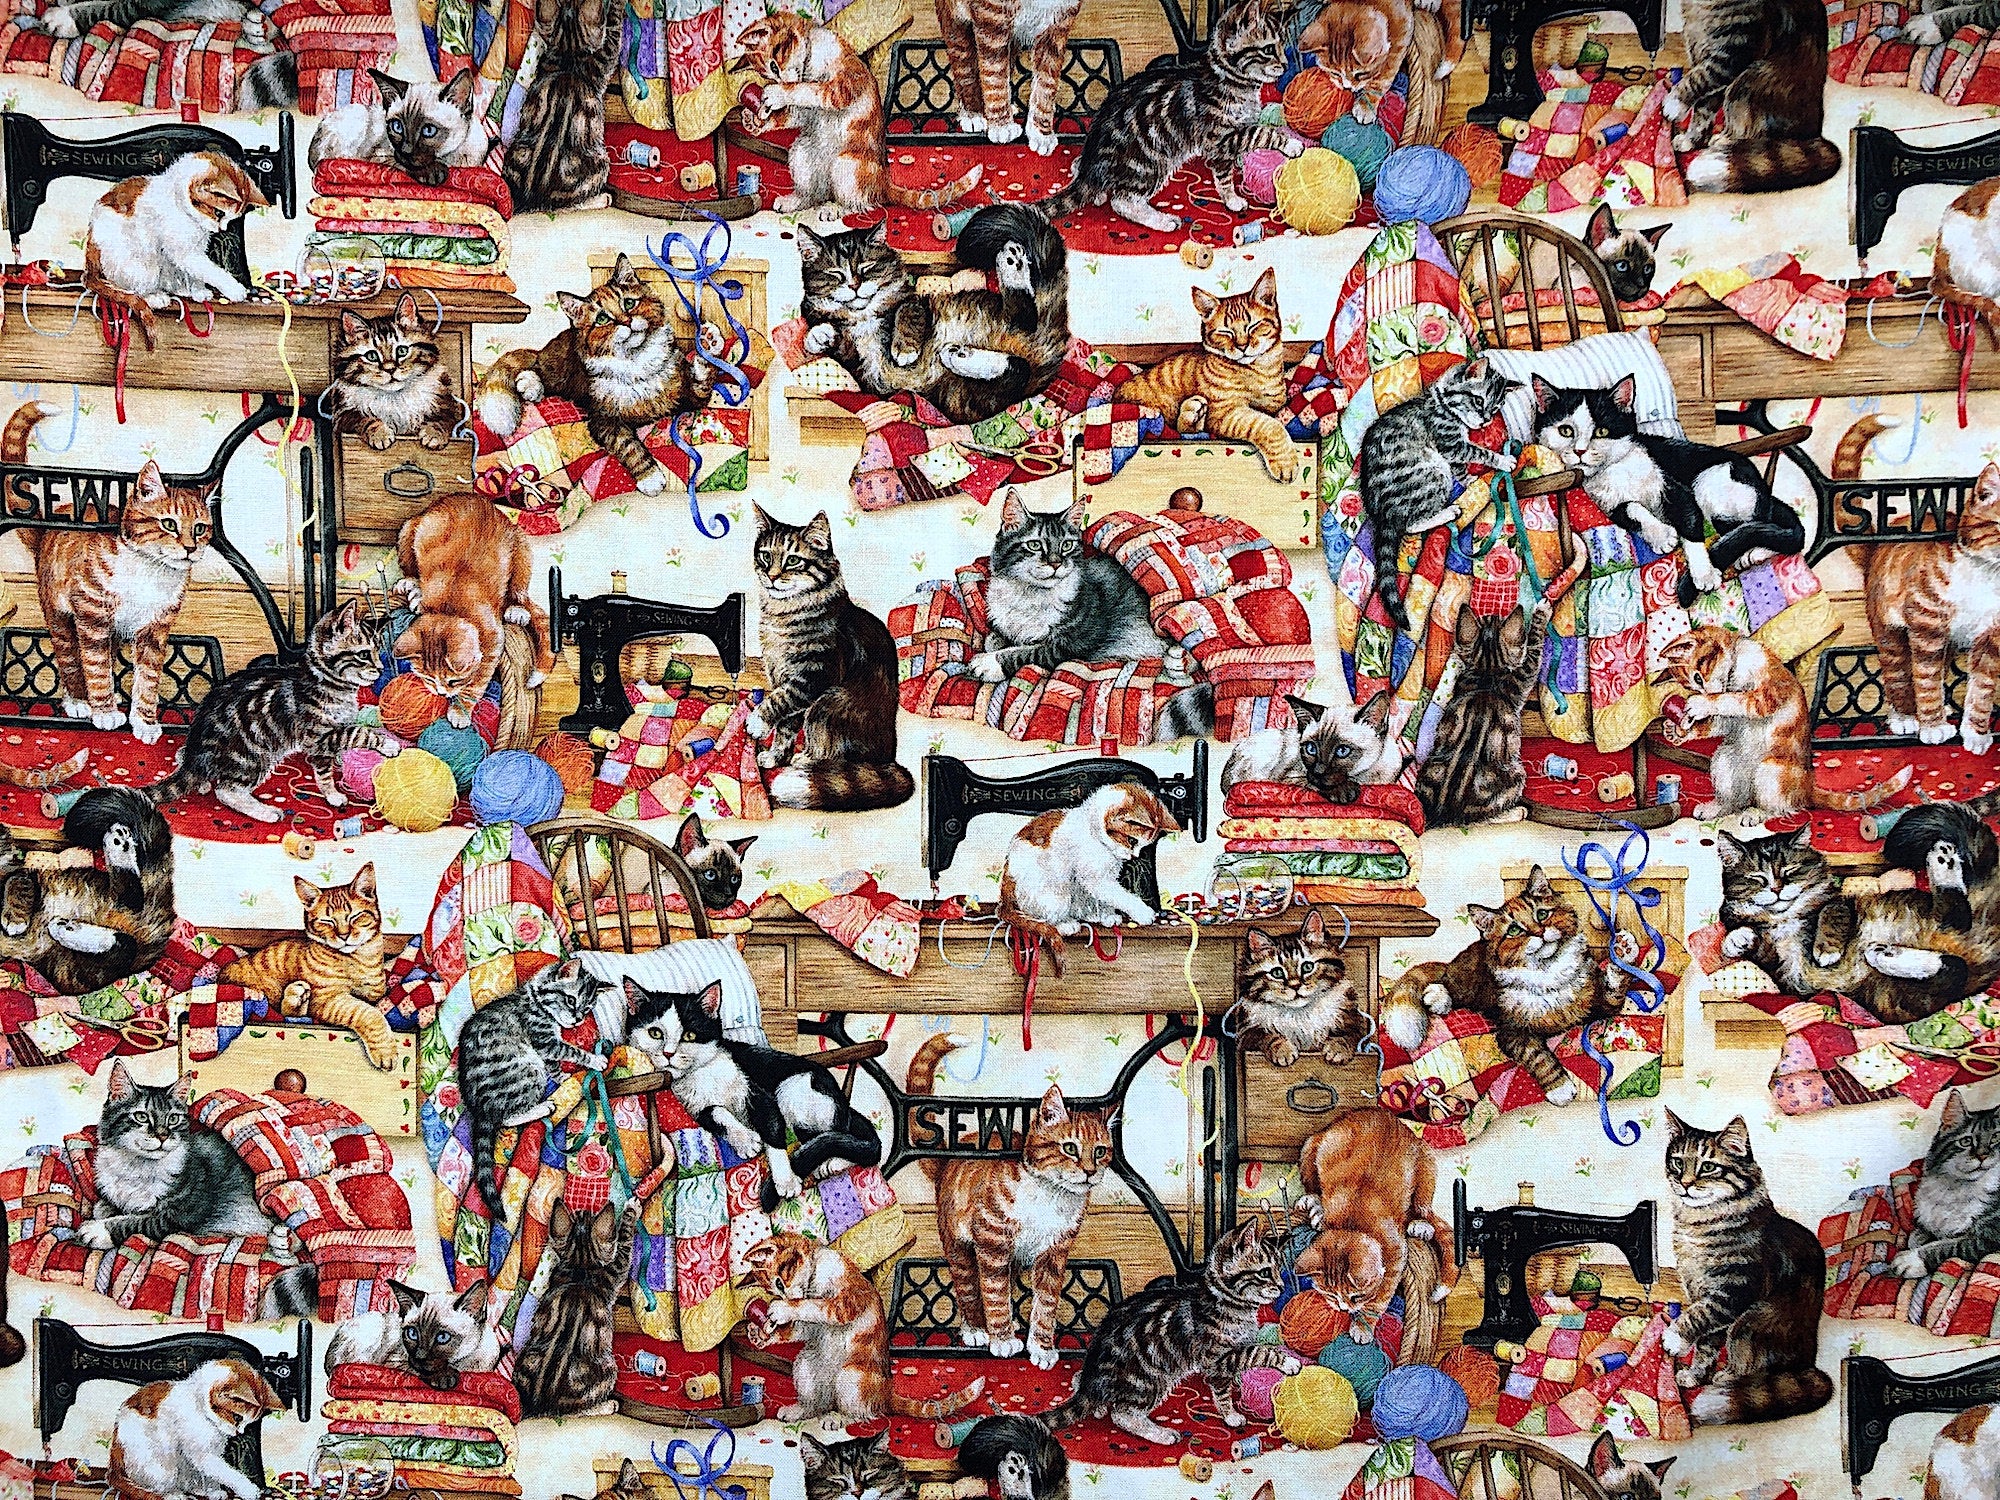 This fabric is called Sewing Buddies and is covered with sewing machines and cats. Some of the cats are sitting on quilts, others are playing in a pile of yarn.